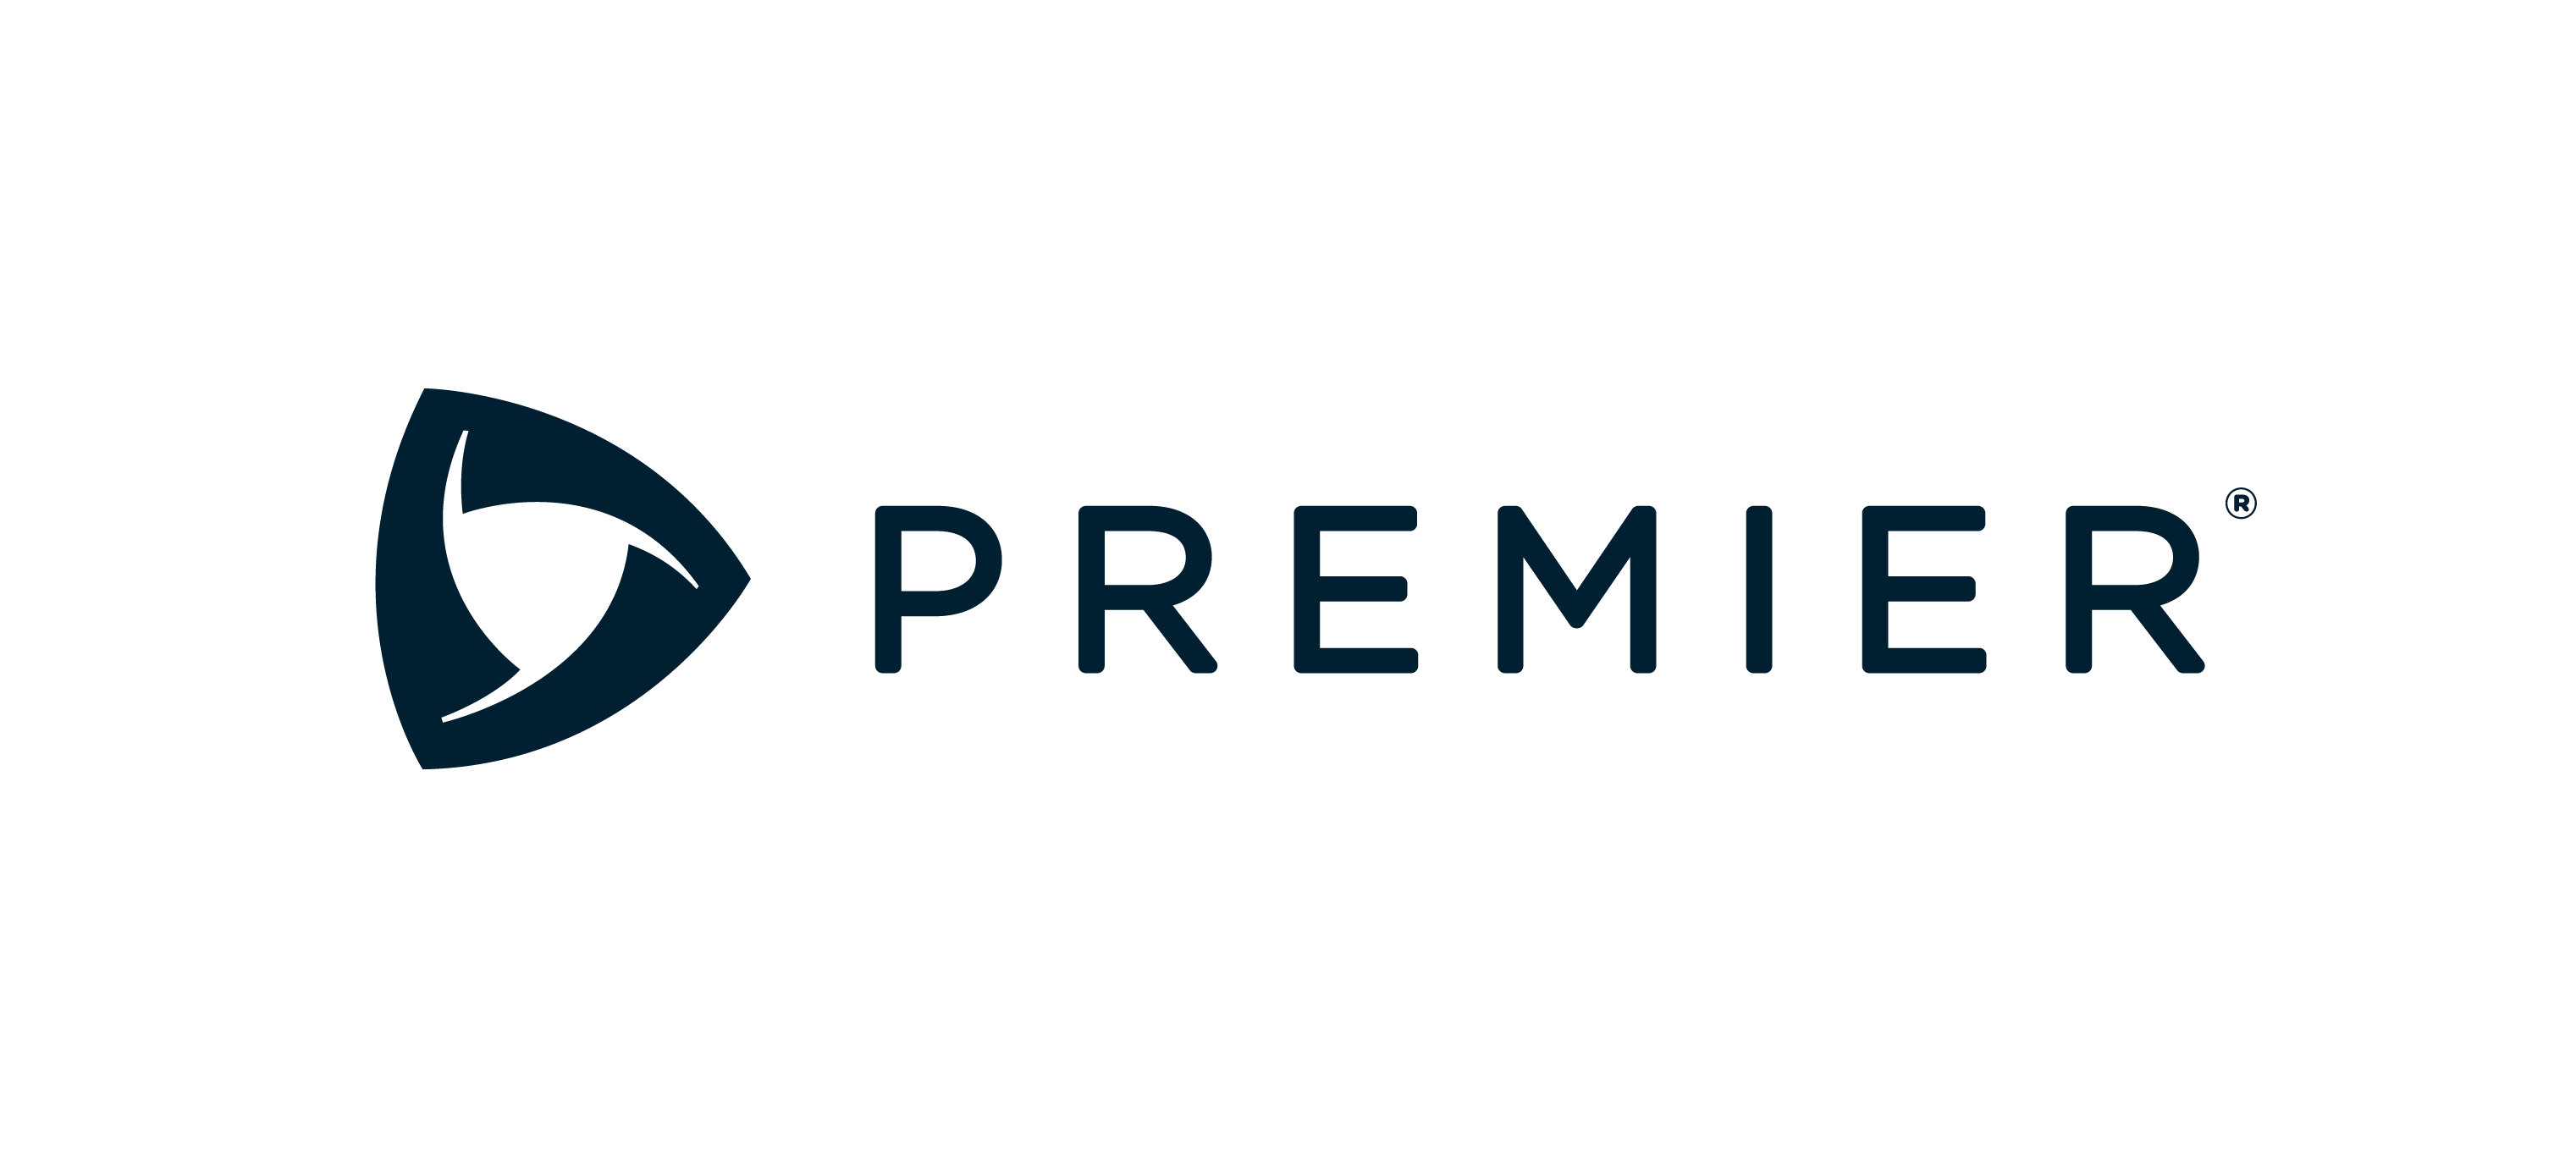 Premier - Find Contract Jobs, On-Site and Remote